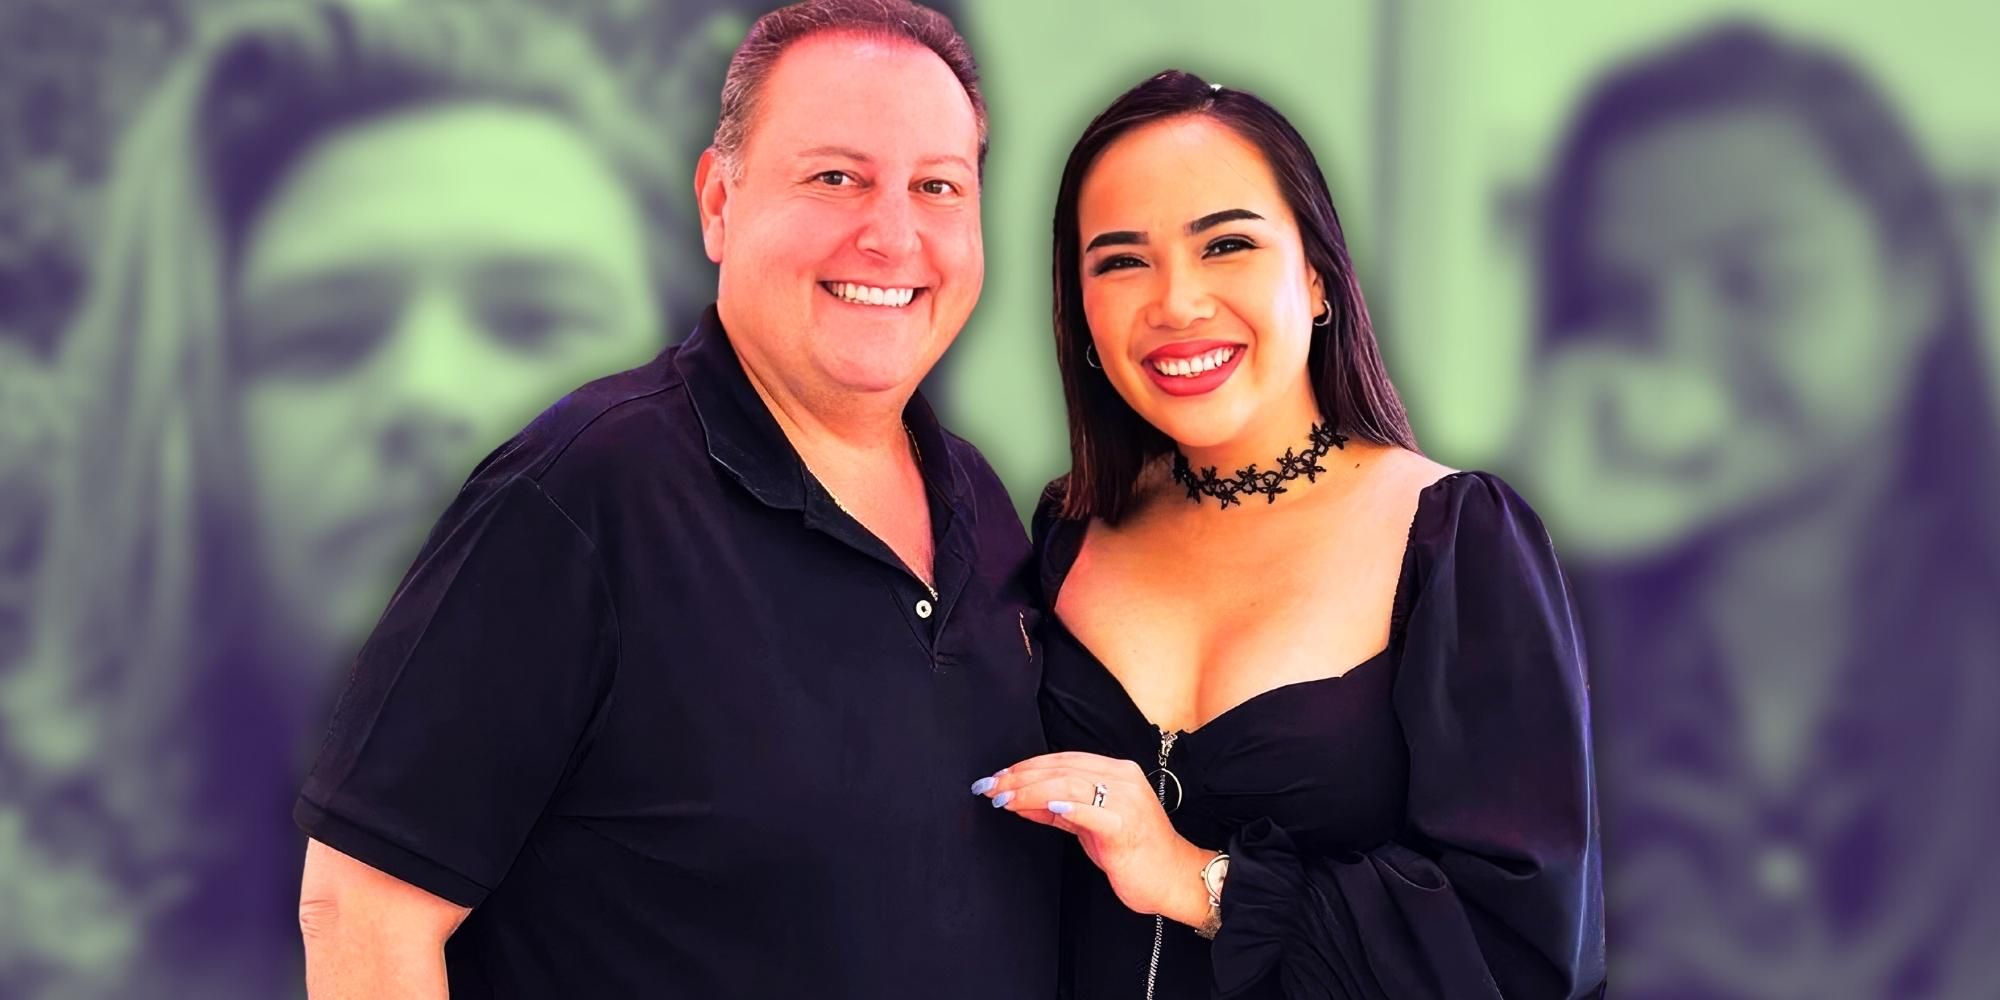 90 Day Fiance's Annie Suwan & David Toborowsky and blurred images of Syngin